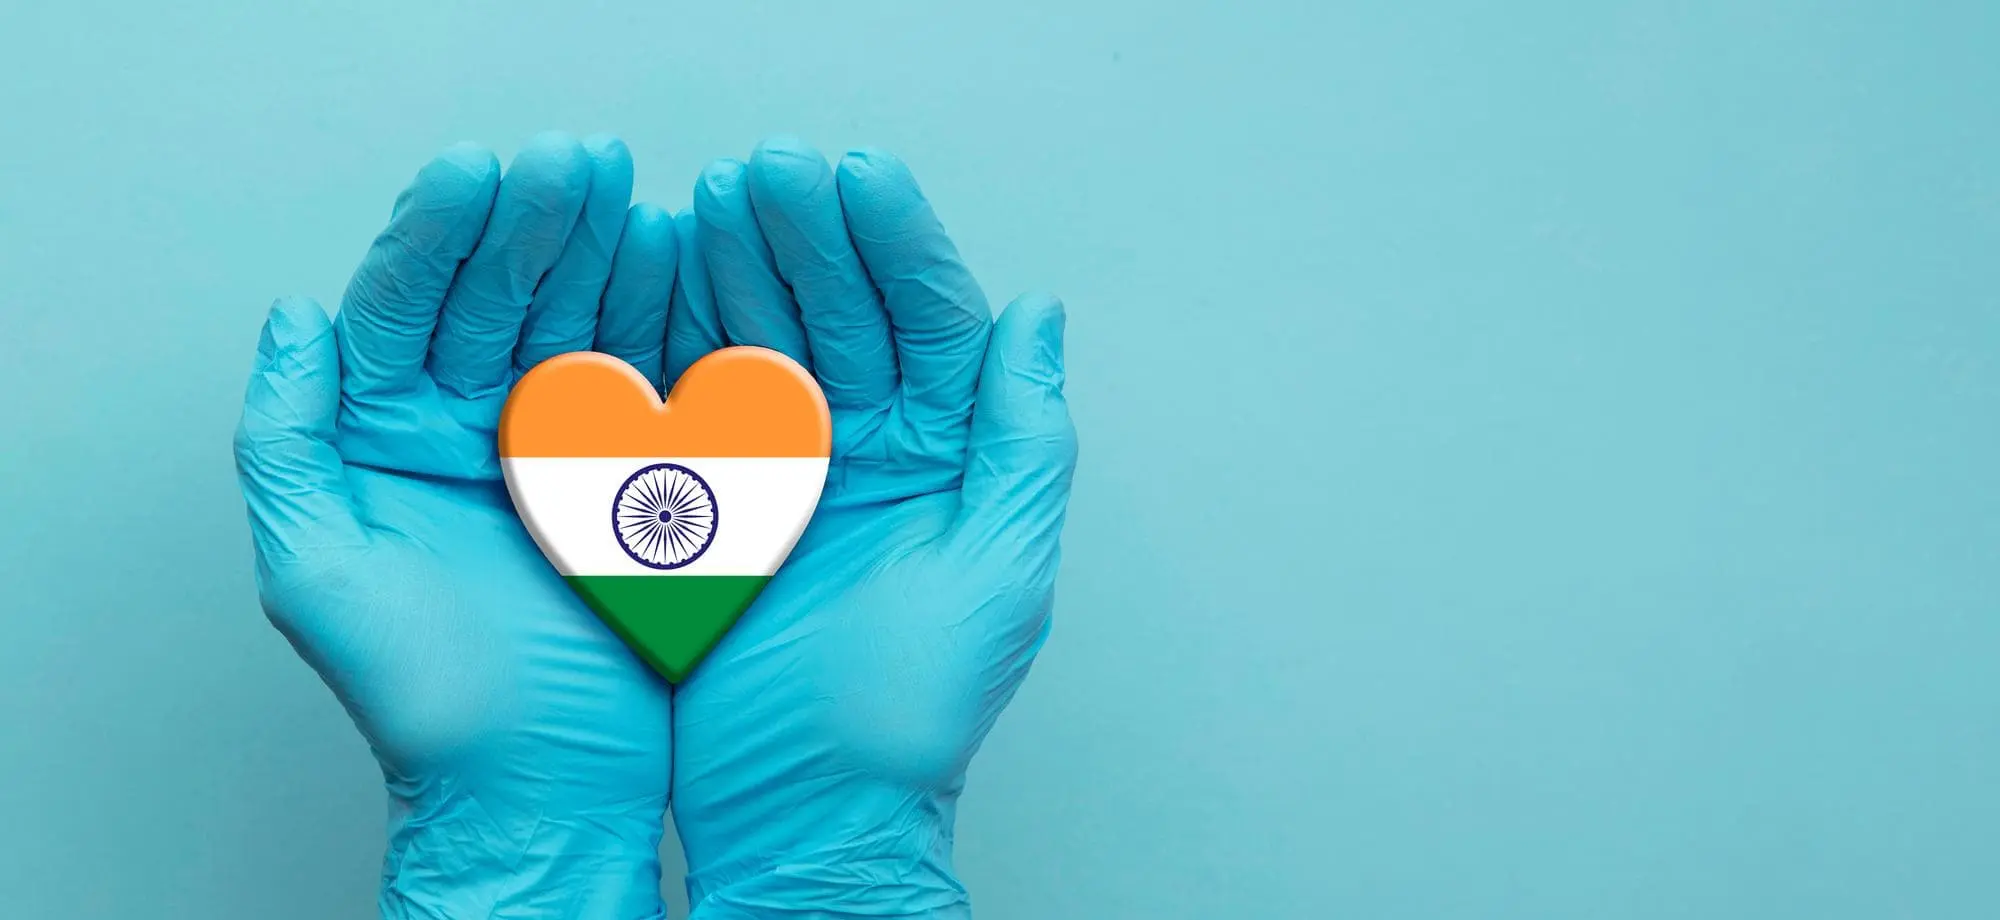 Indian flag printed on heart held between joined hands